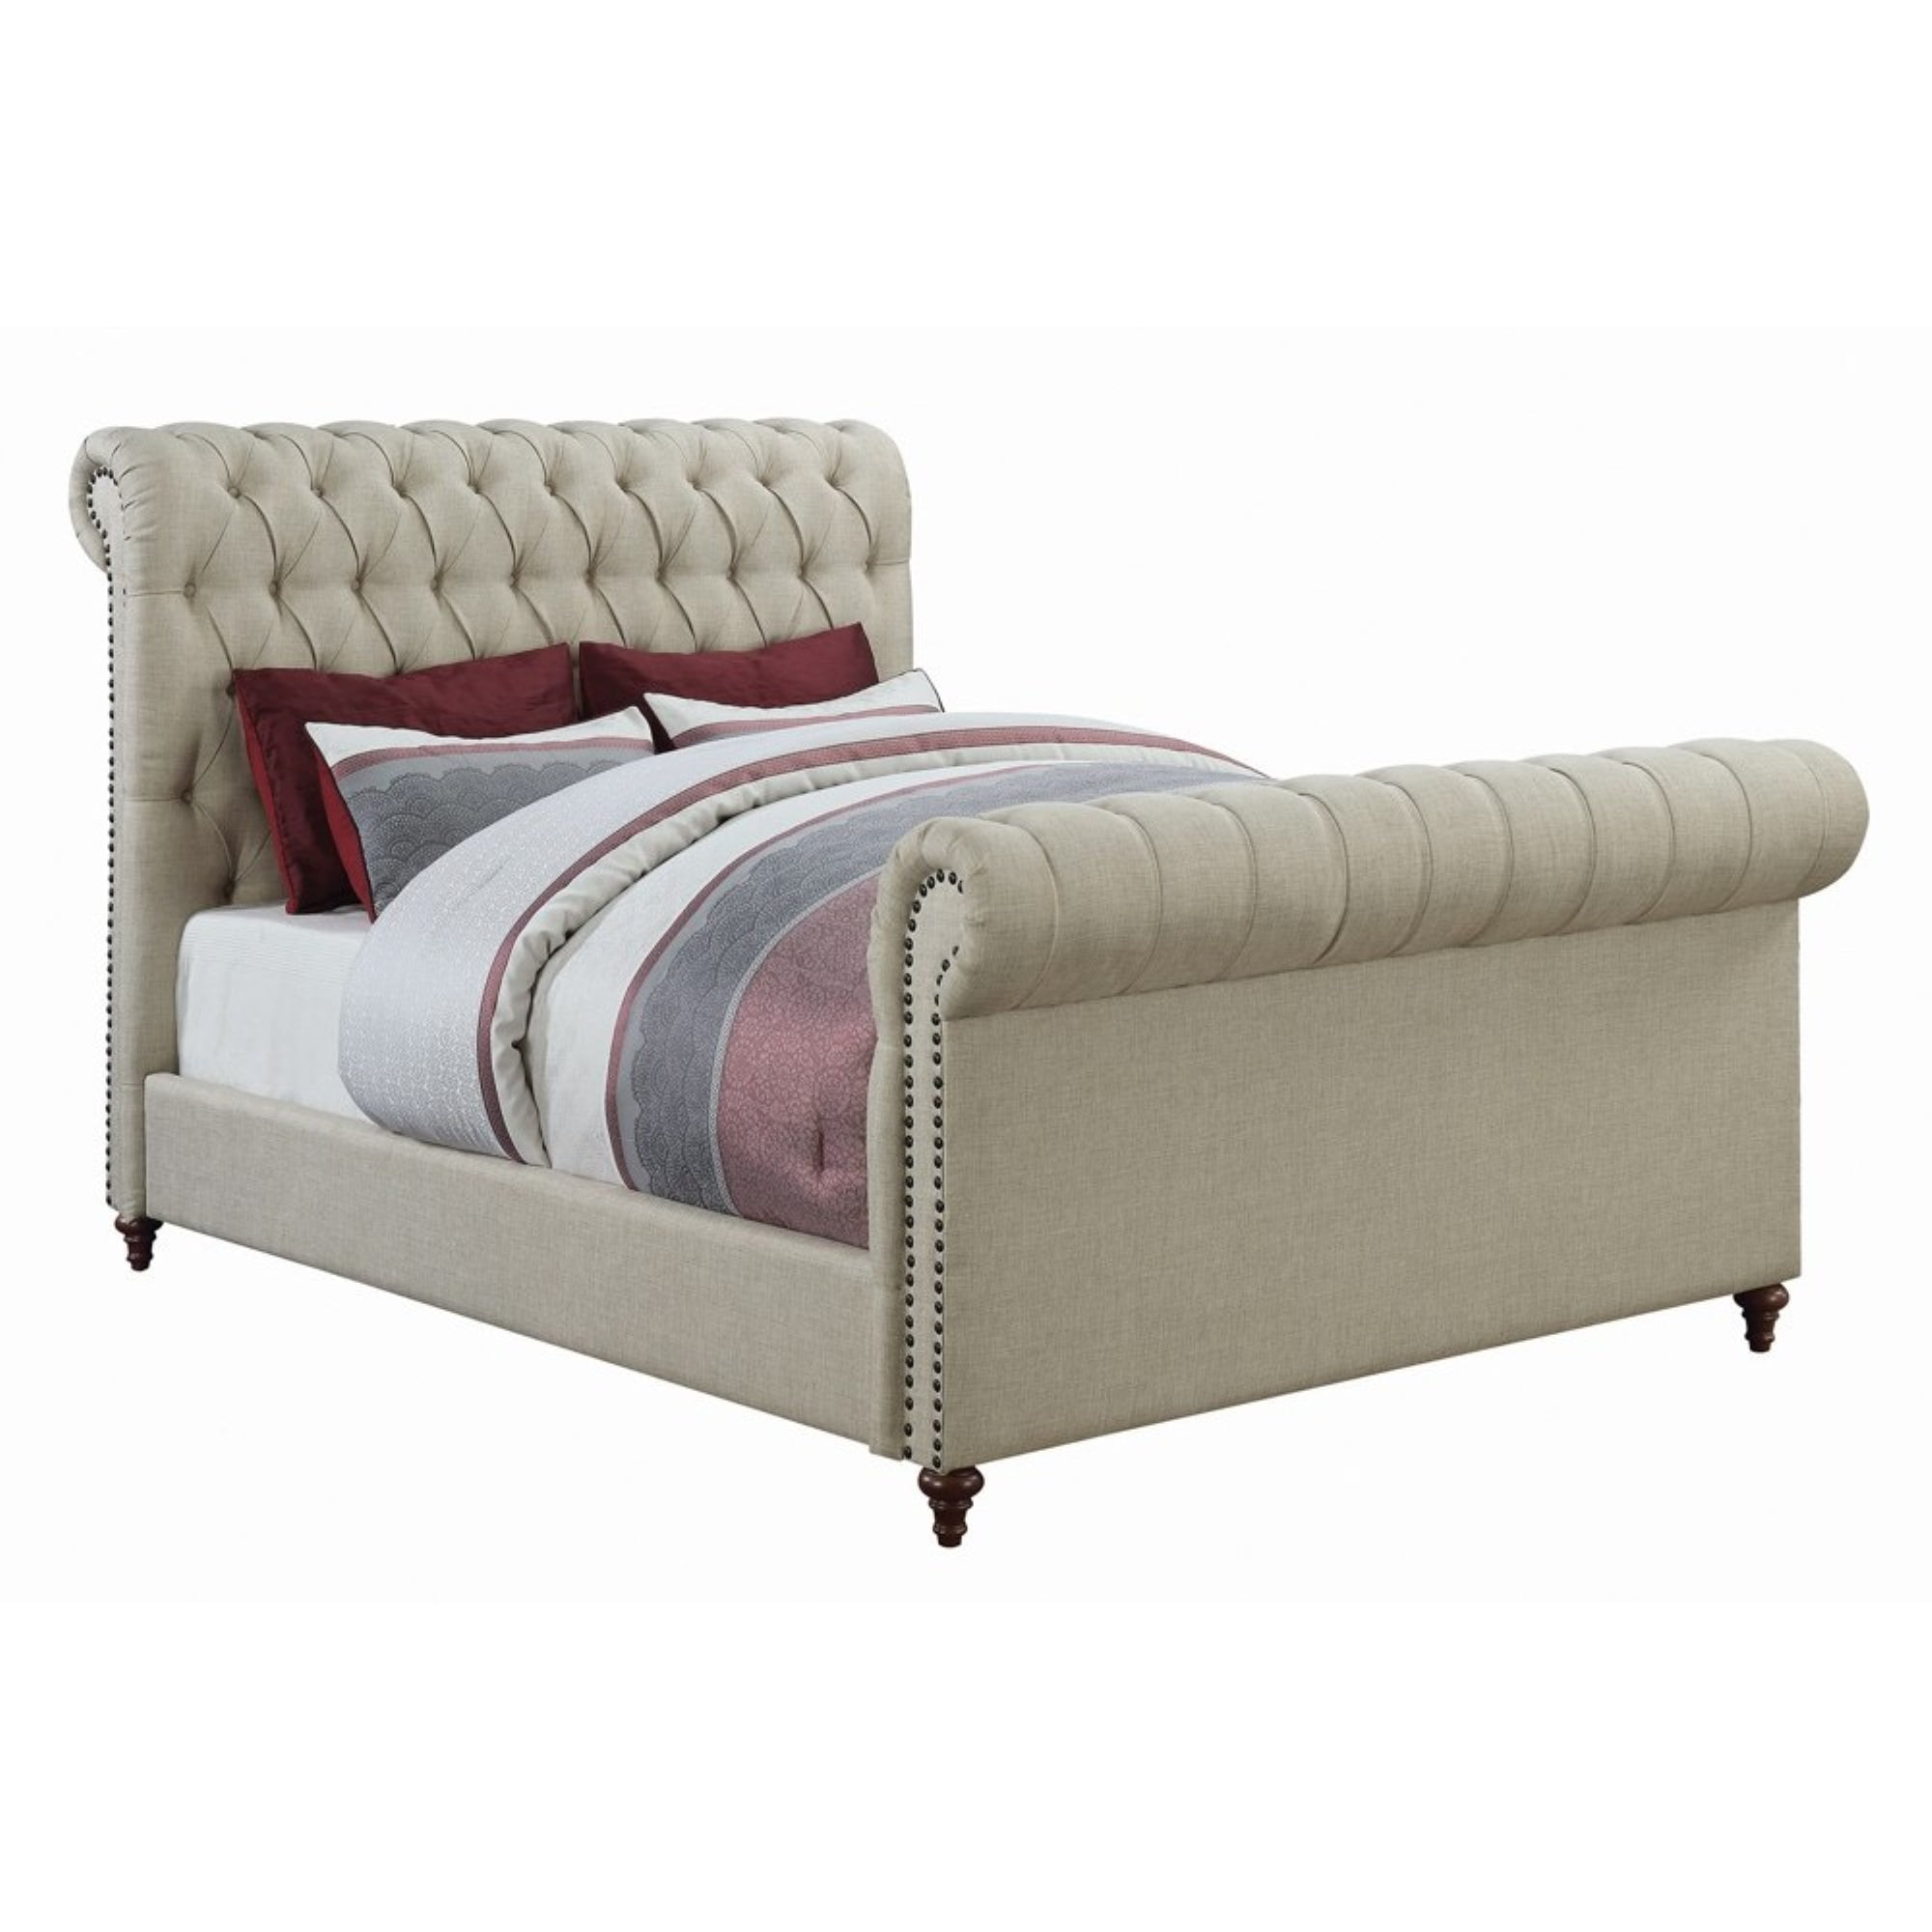 Button Tufted Queen Size Bed with Scrolled Headboard and Footboard